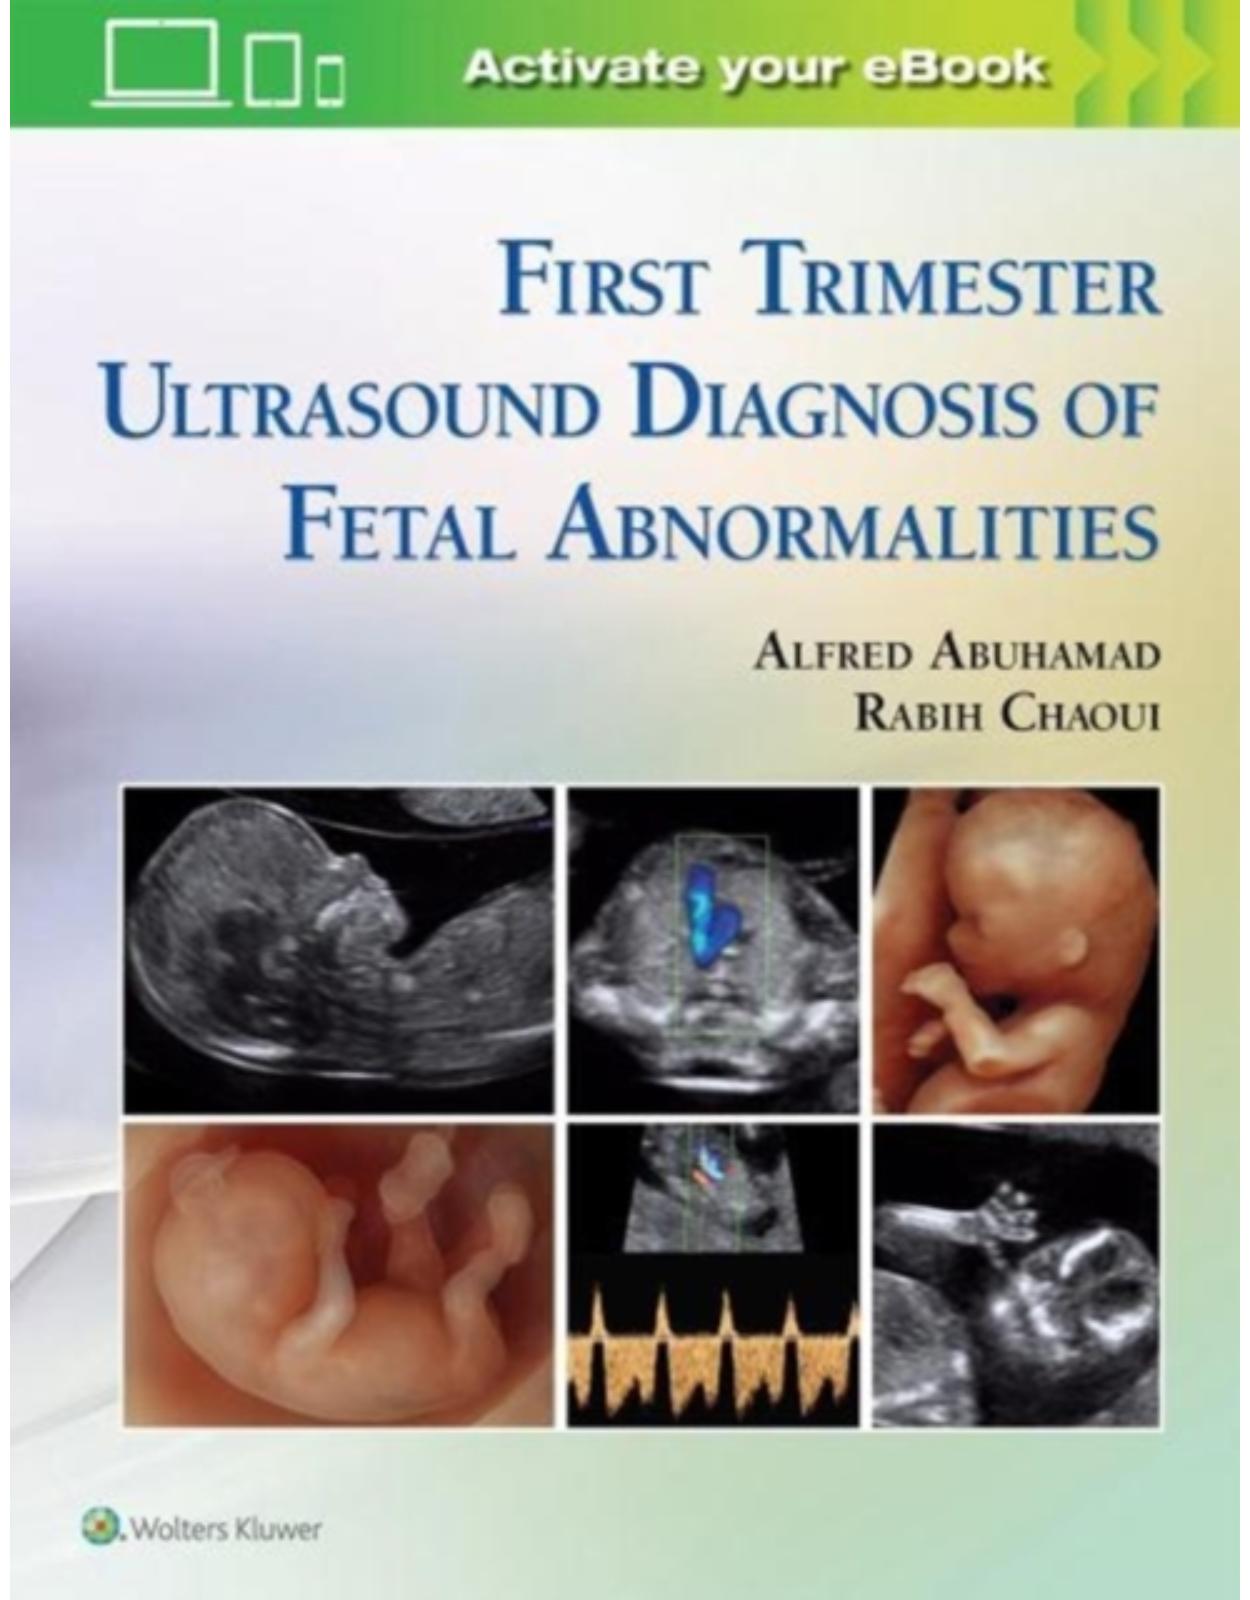 First Trimester Ultrasound Diagnosis of Fetal Abnormalities 